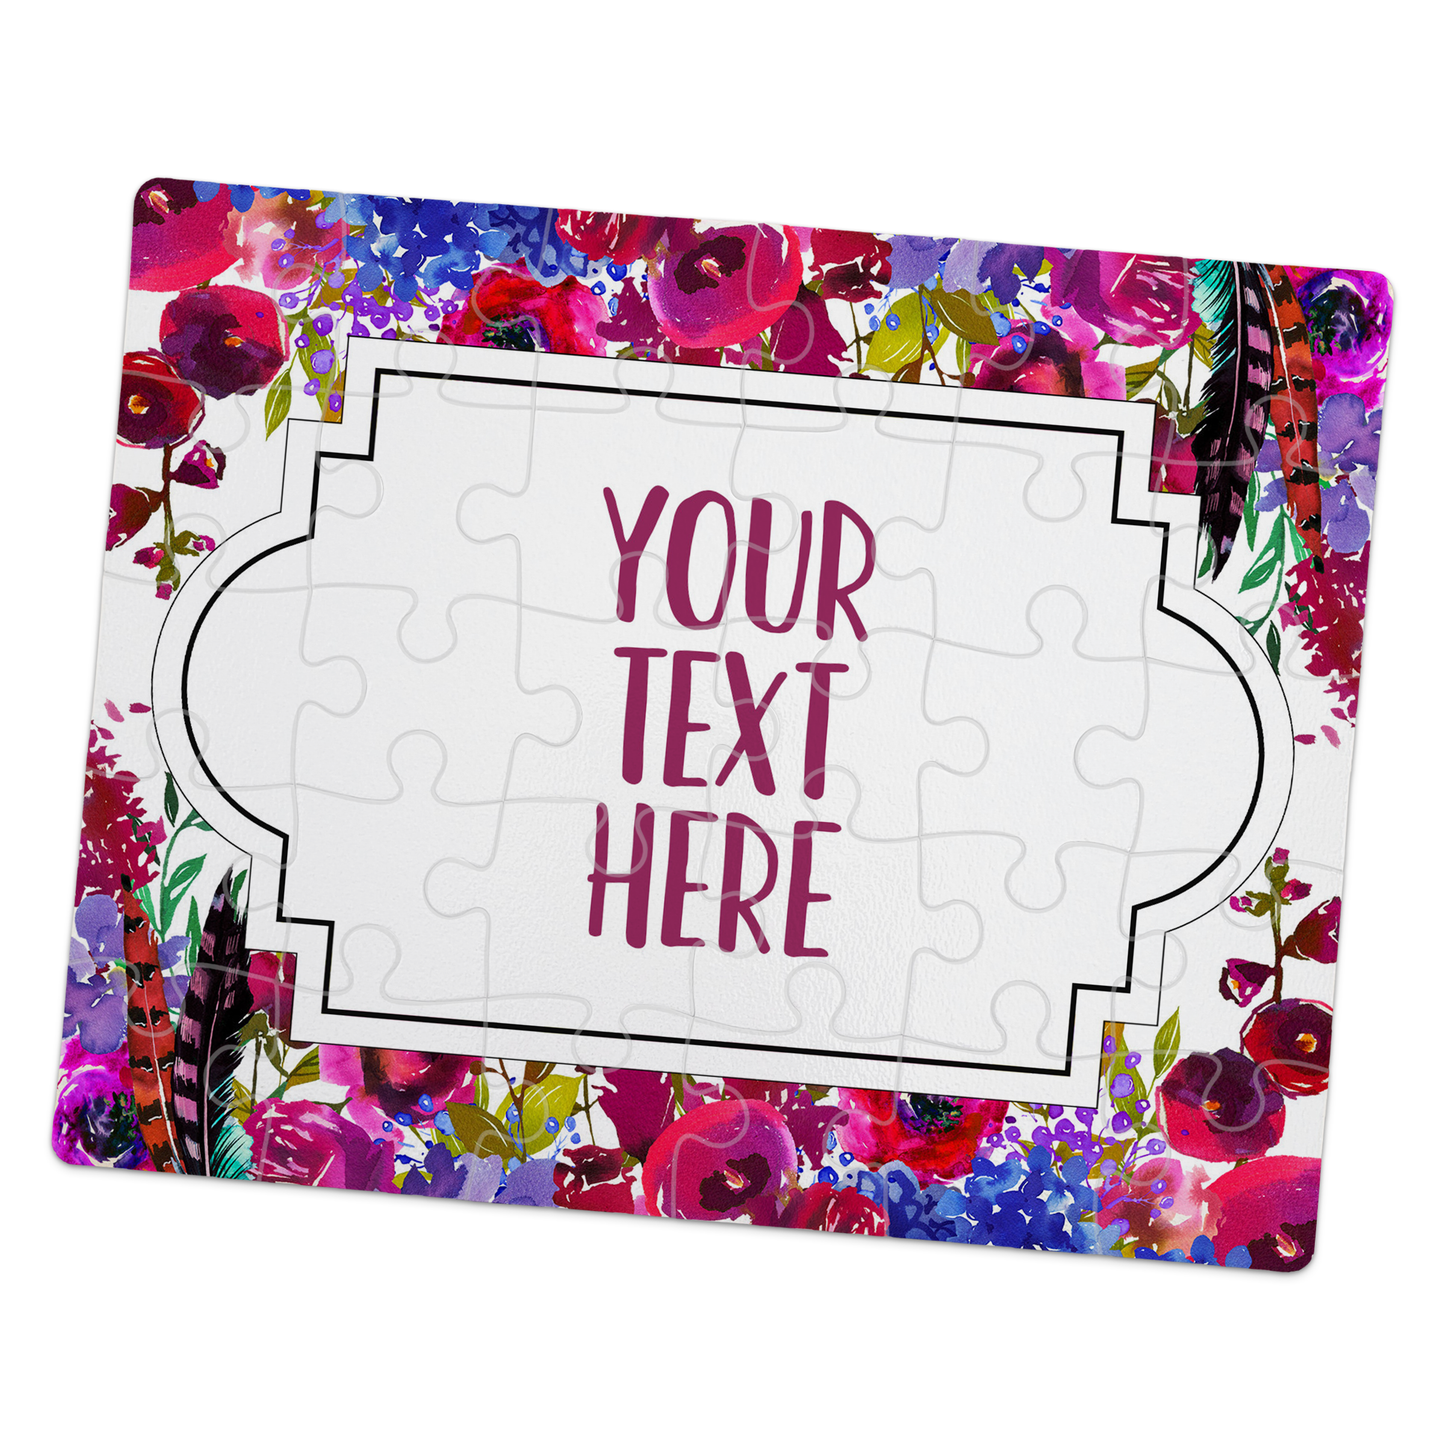 Create Your Own Puzzle - Floral Design - CYOP0114 | S'Berry Boutique